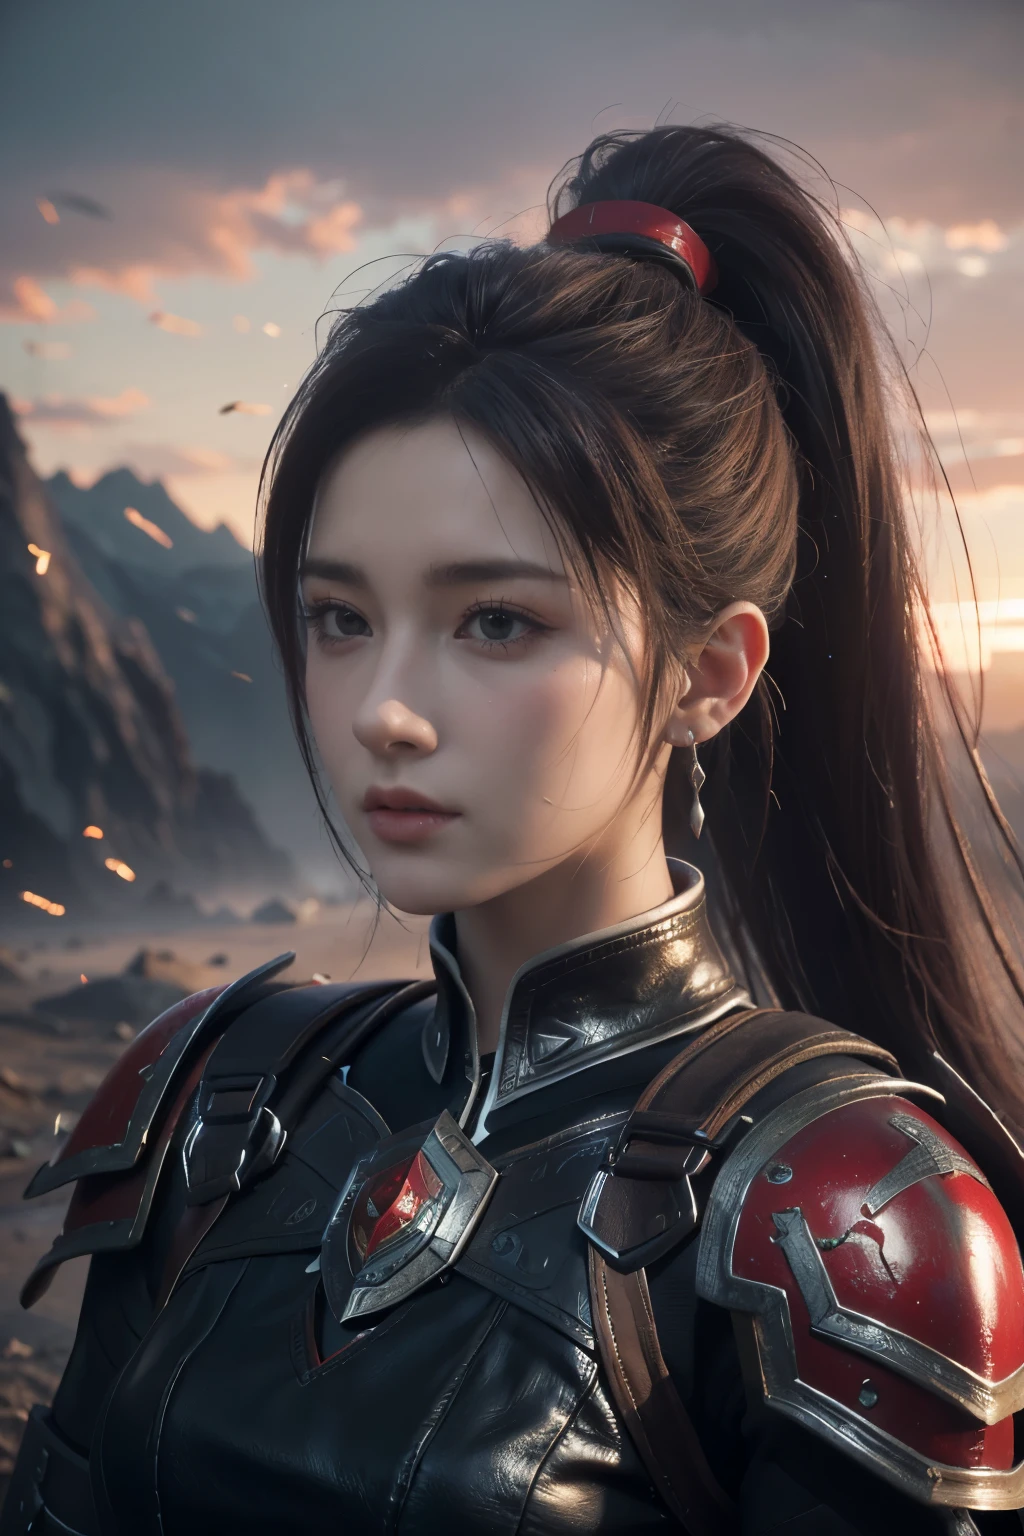 Masterpiece,Game art,The best picture quality,Highest resolution,8K,(Portrait),Unreal Engine 5 rendering works,(Digital Photography),
Girl,Beautiful pupil,(Gradual Long ponytail hair is blue and red),Busty,(Big breasts),(Portrait photography:1.5),
(Soldiers of the ancient fantasy style),Ancient soldier armor,(The armor is inlaid with leather and metal,Combat accessories,Joint Armor,Cloak,A fine badge pattern on the dress,Red and black),Ancient fantasy style characters,
Movie lights，Ray tracing，Game CG，((3D Unreal Engine))，OC rendering reflection pattern